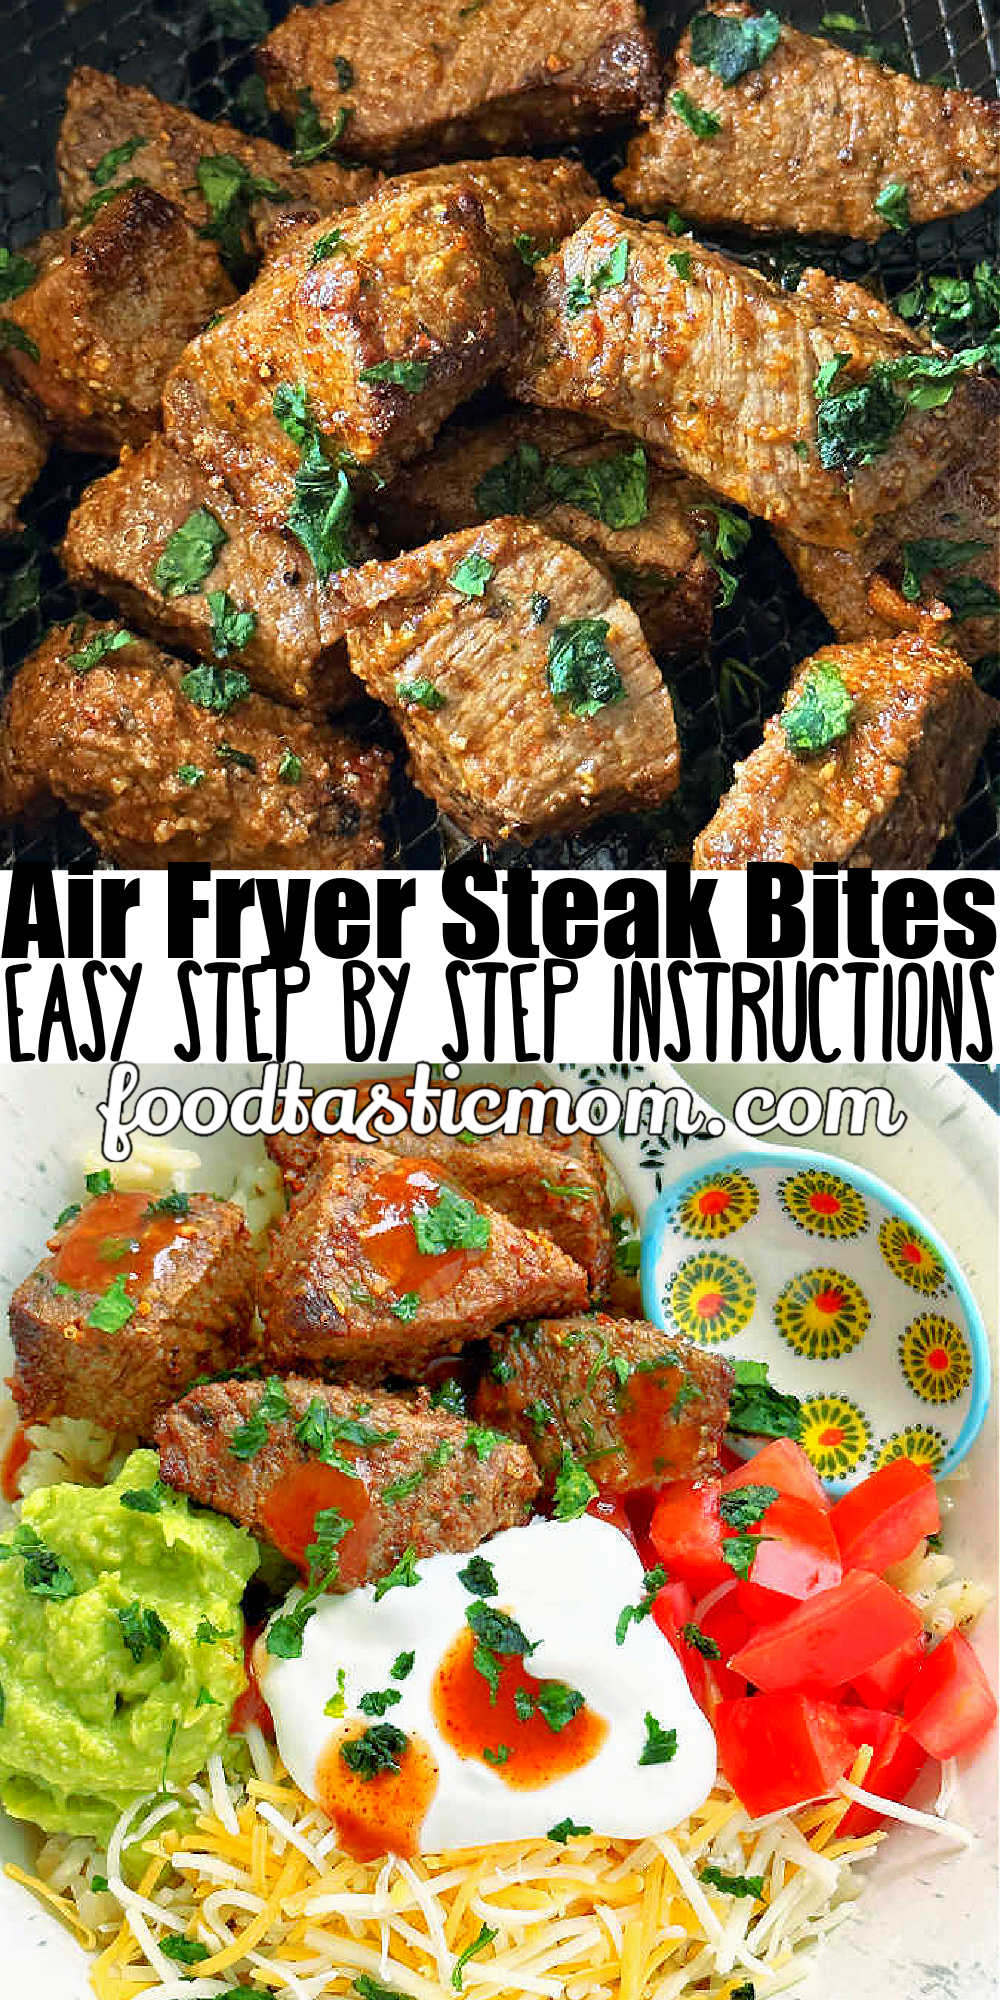 Air Fryer Steak Bites are an economical choice to make a pricier steak feed more people. They are so quick to make and perfectly cooked! via @foodtasticmom